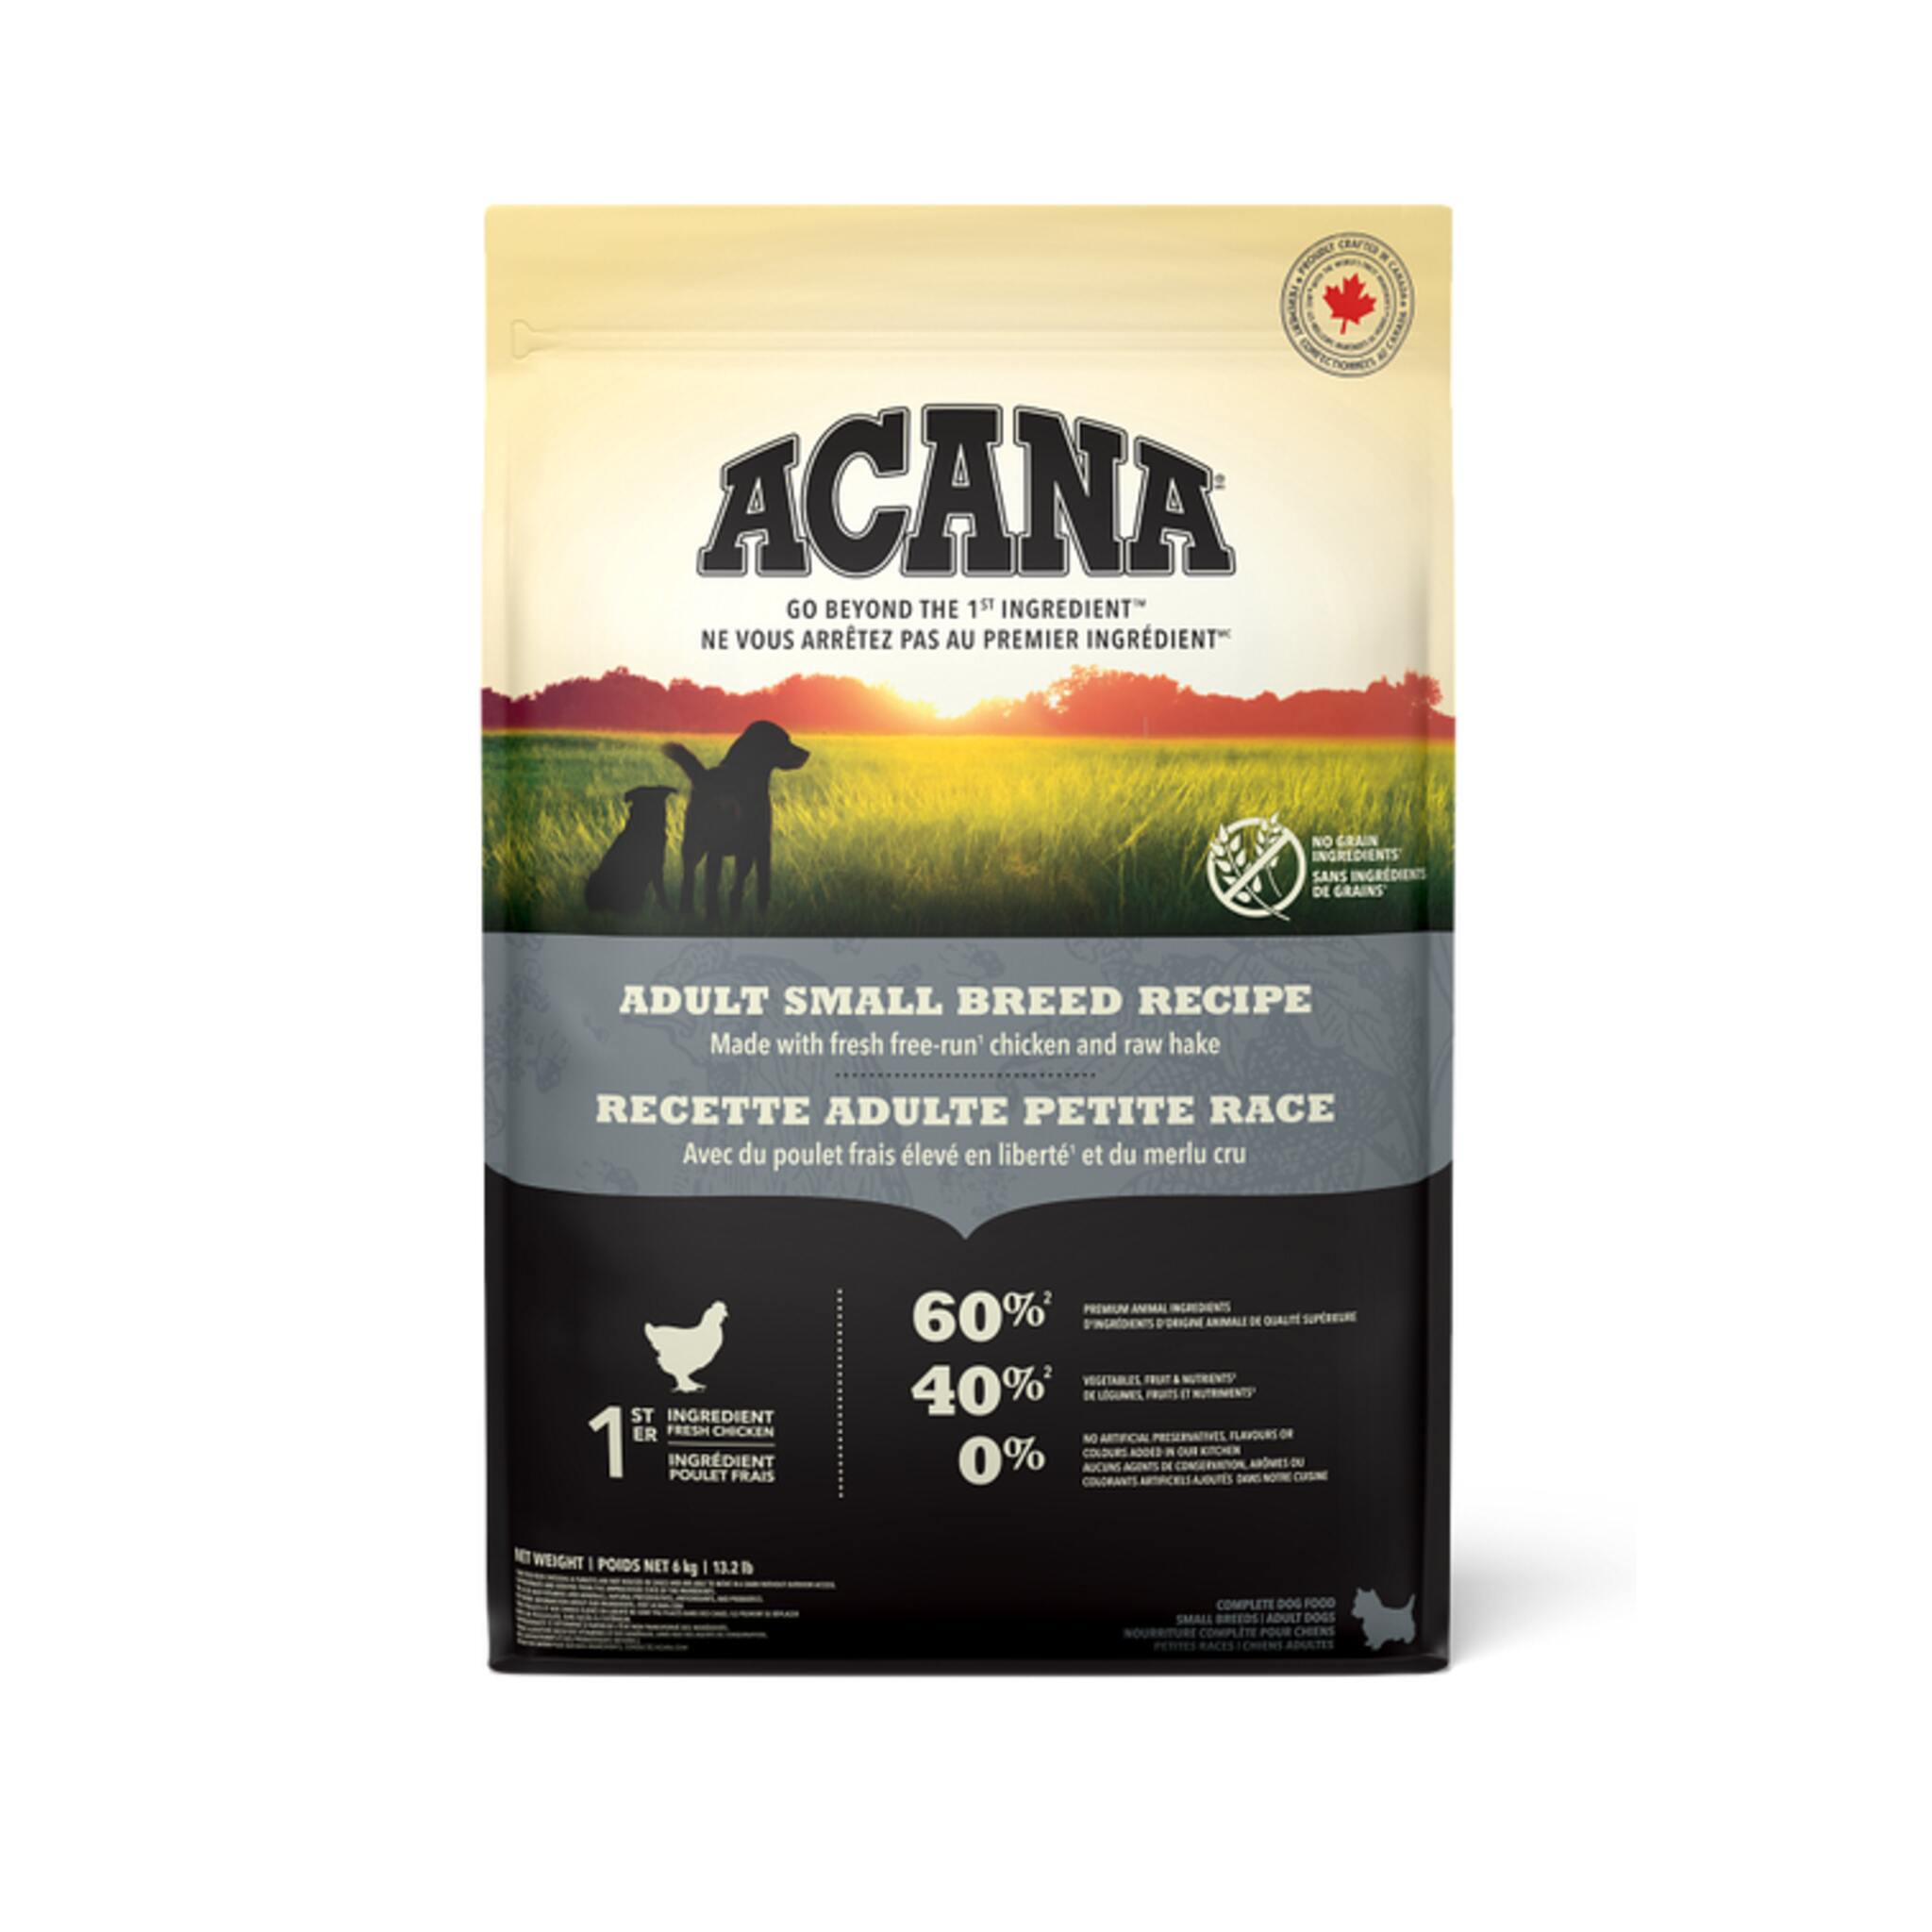 A bag of Acana adult small breed dog food, chicken recipe, 13.2 lb.